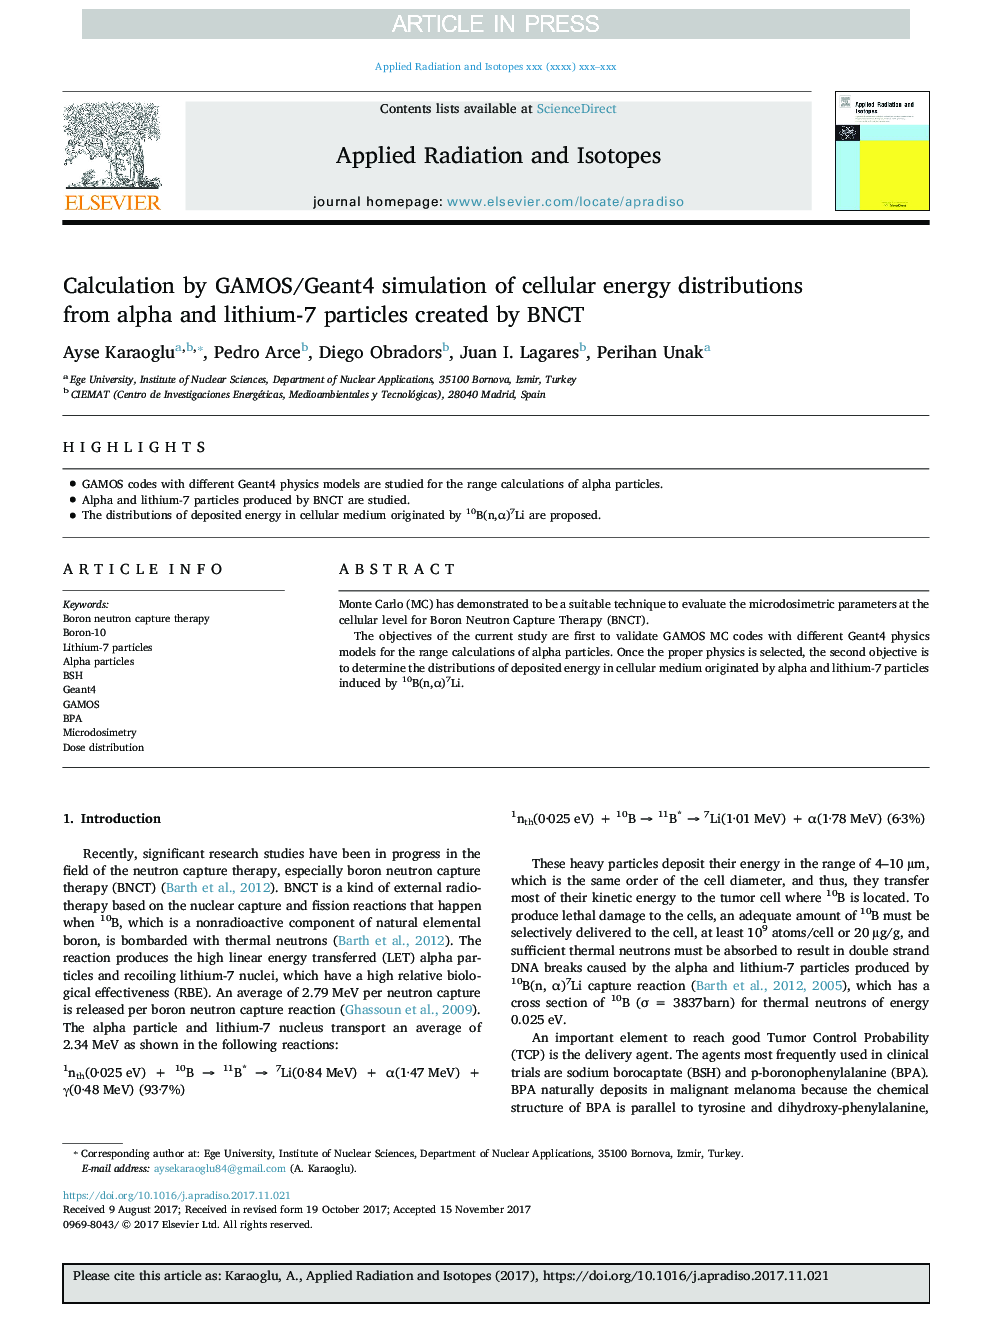 Calculation by GAMOS/Geant4 simulation of cellular energy distributions from alpha and lithium-7 particles created by BNCT